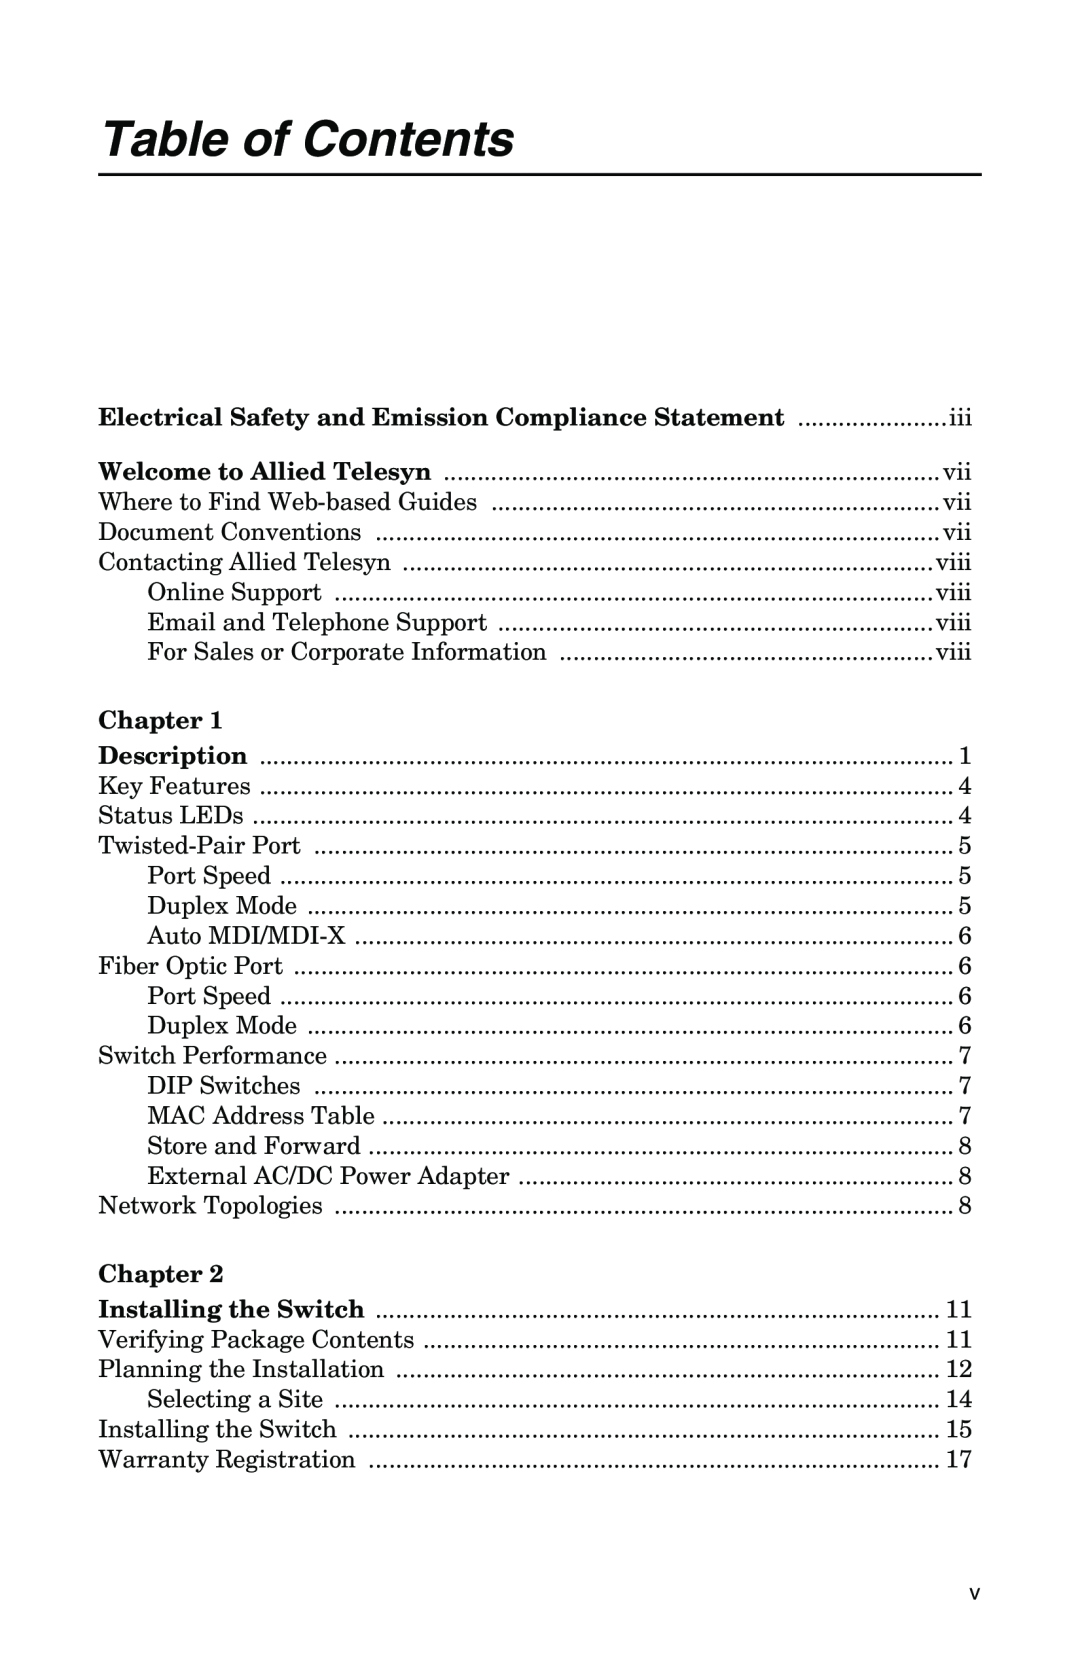 IBM AT-FS202 Table of Contents, Electrical Safety and Emission Compliance Statement, Chapter, Welcome to Allied Telesyn 